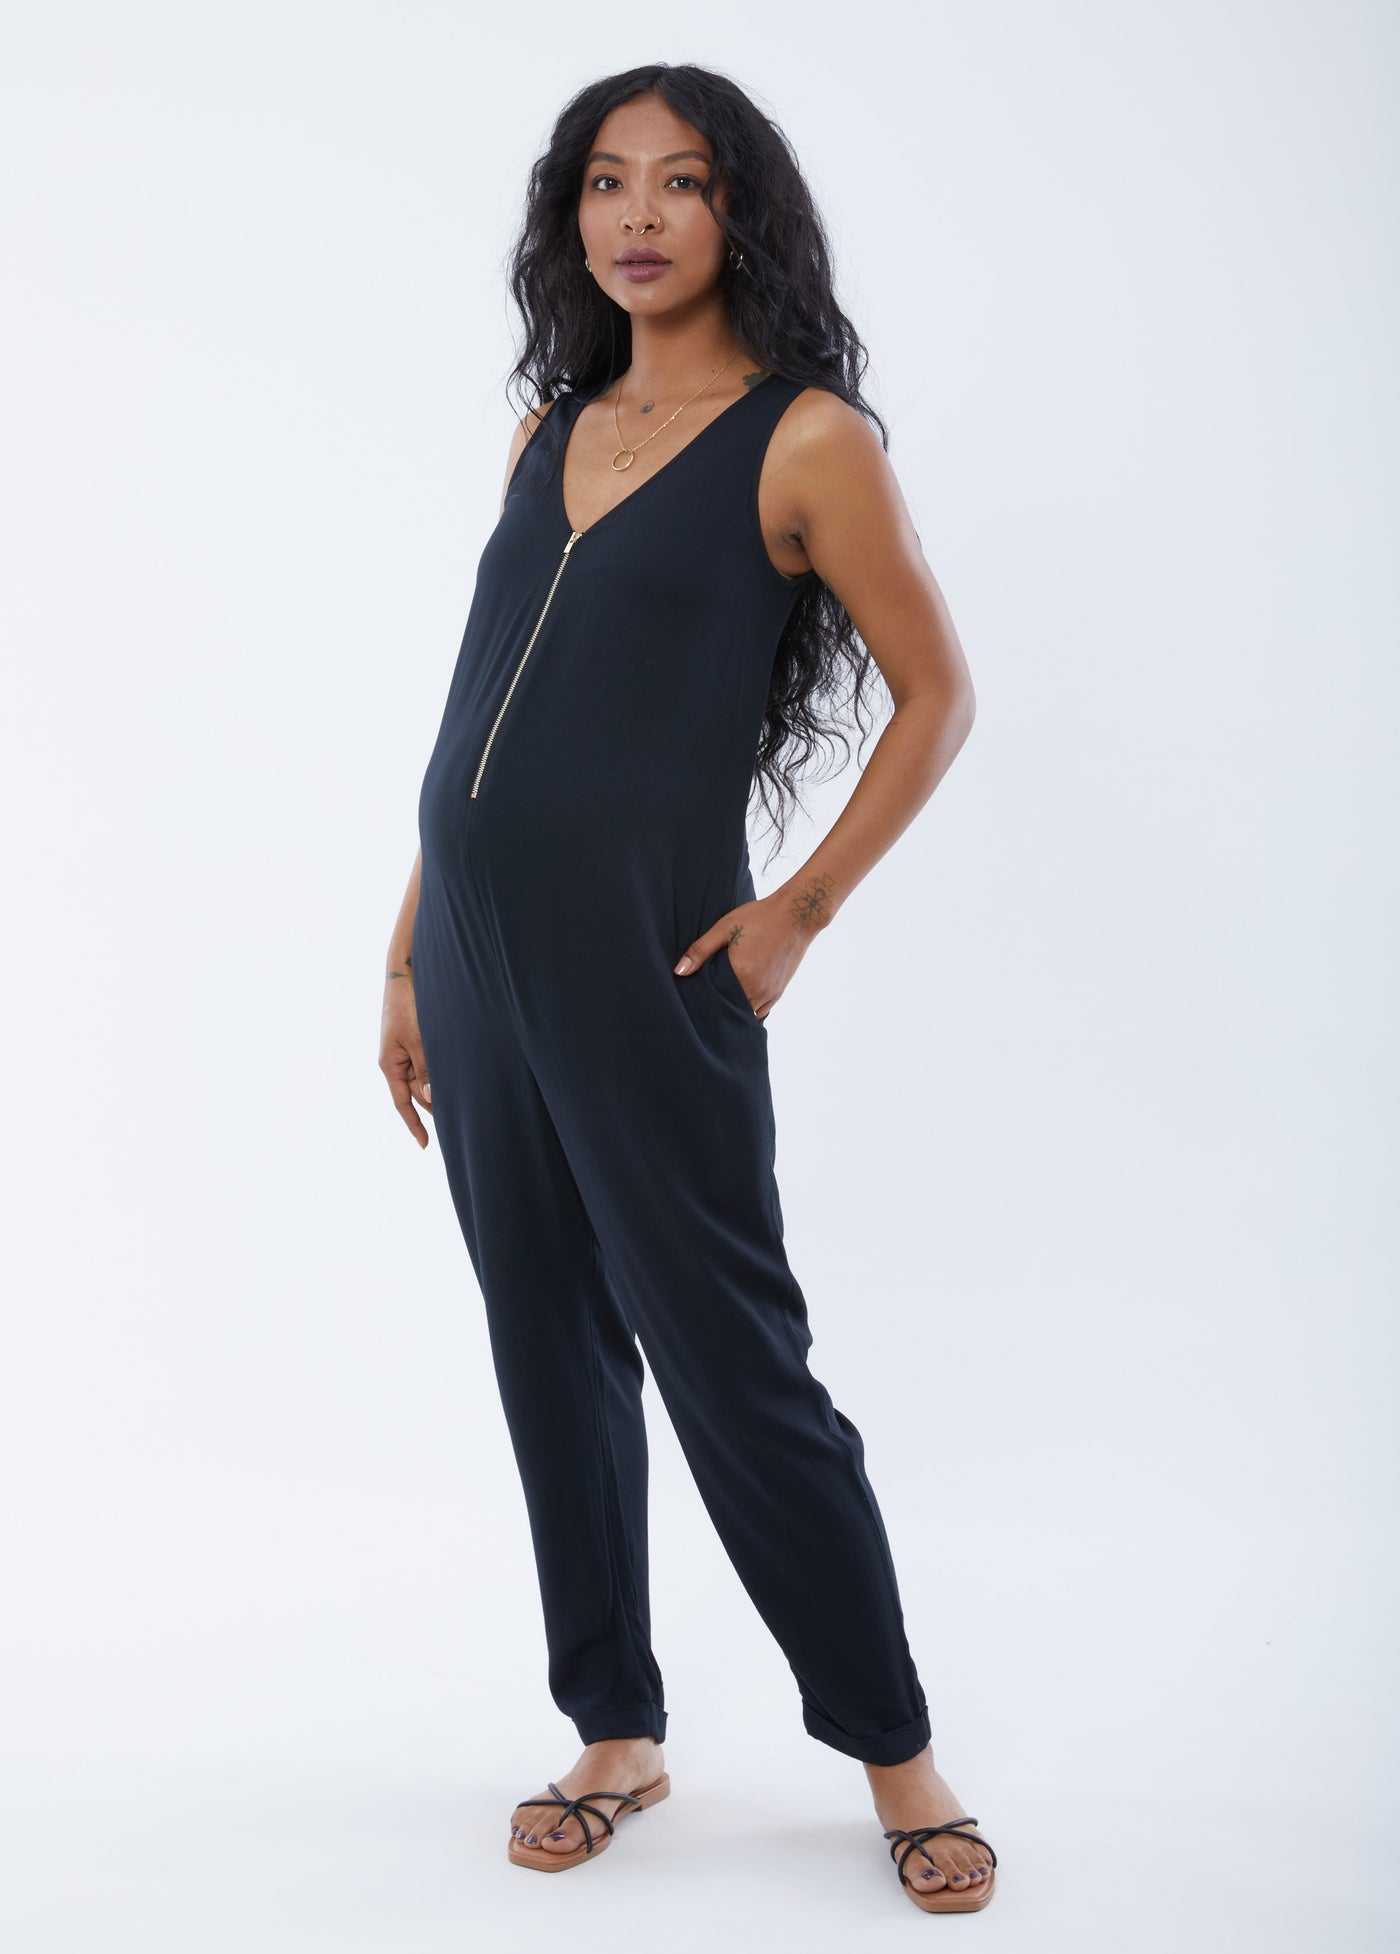 2023 Spring And Autumn Maternity Dungaree Jumpsuit Casual Loose Overalls  For Pregnant Women From Wuhuamaa, $22.32 | DHgate.Com